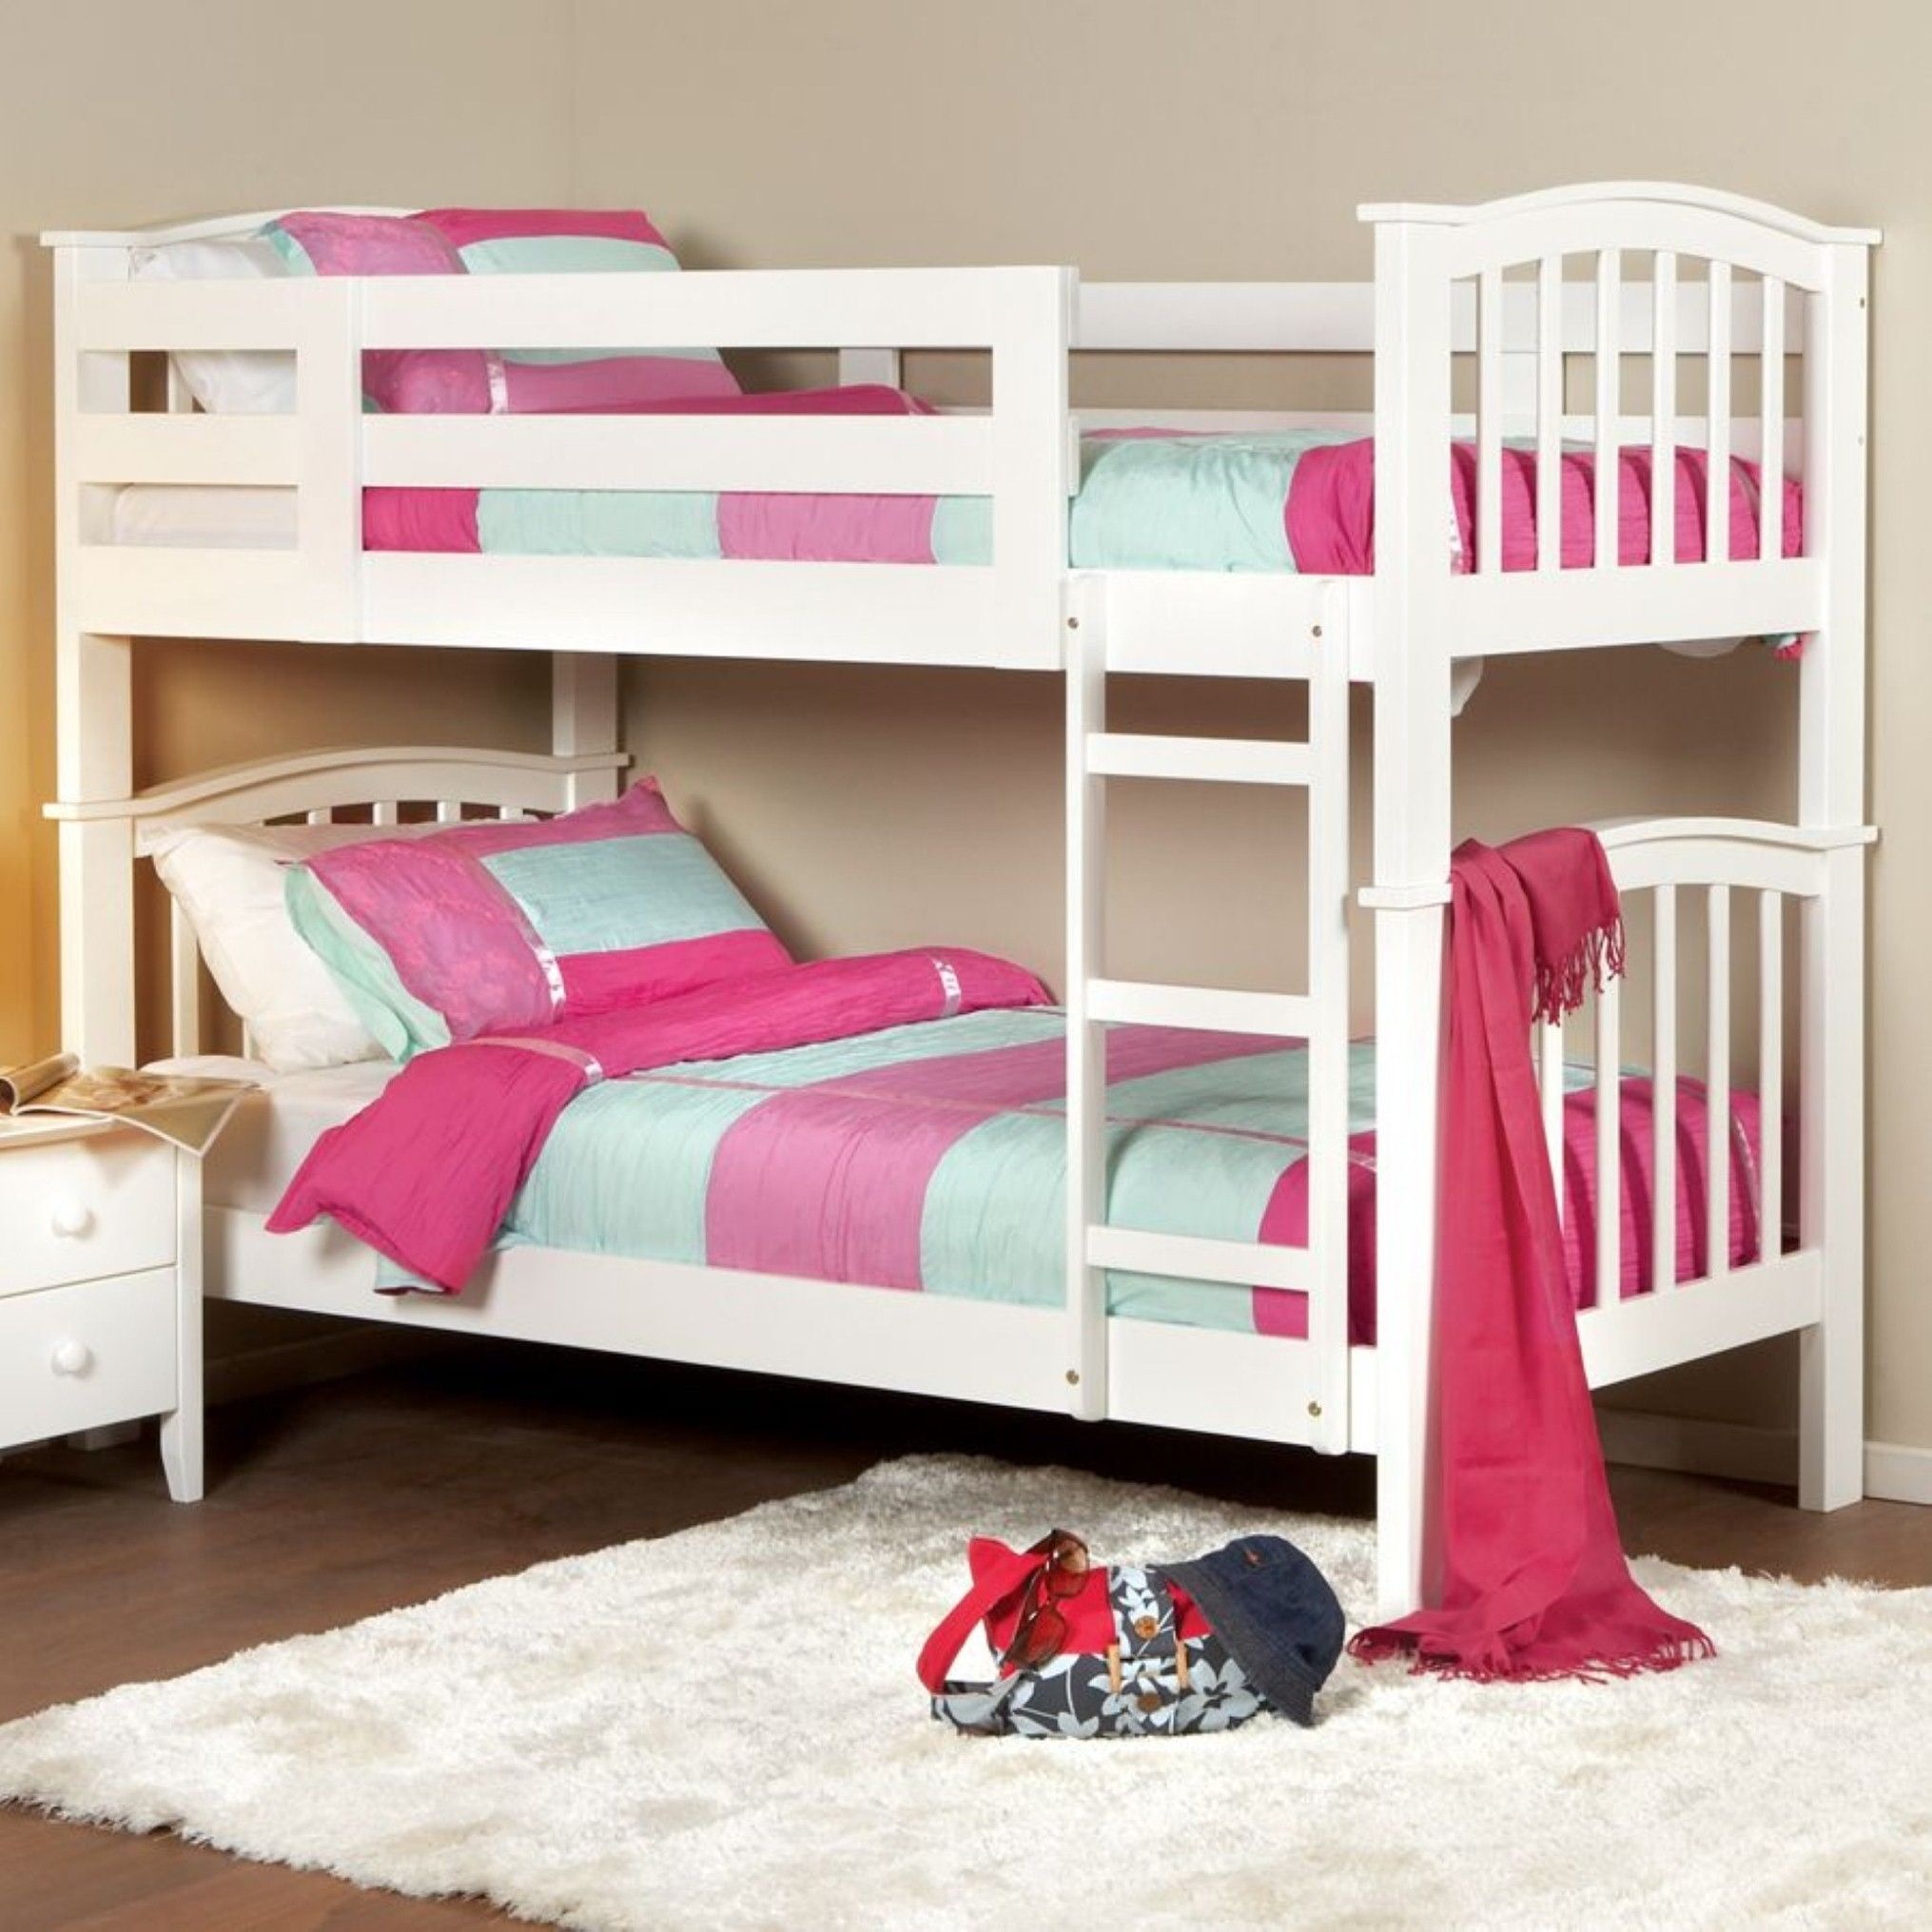 Luxury Interior Kids Bedroom With Cool White Twin Bunk Bed Idea Plus Colorful Bedding Set And Comfy Thick Fur Rug (View 88 of 123)